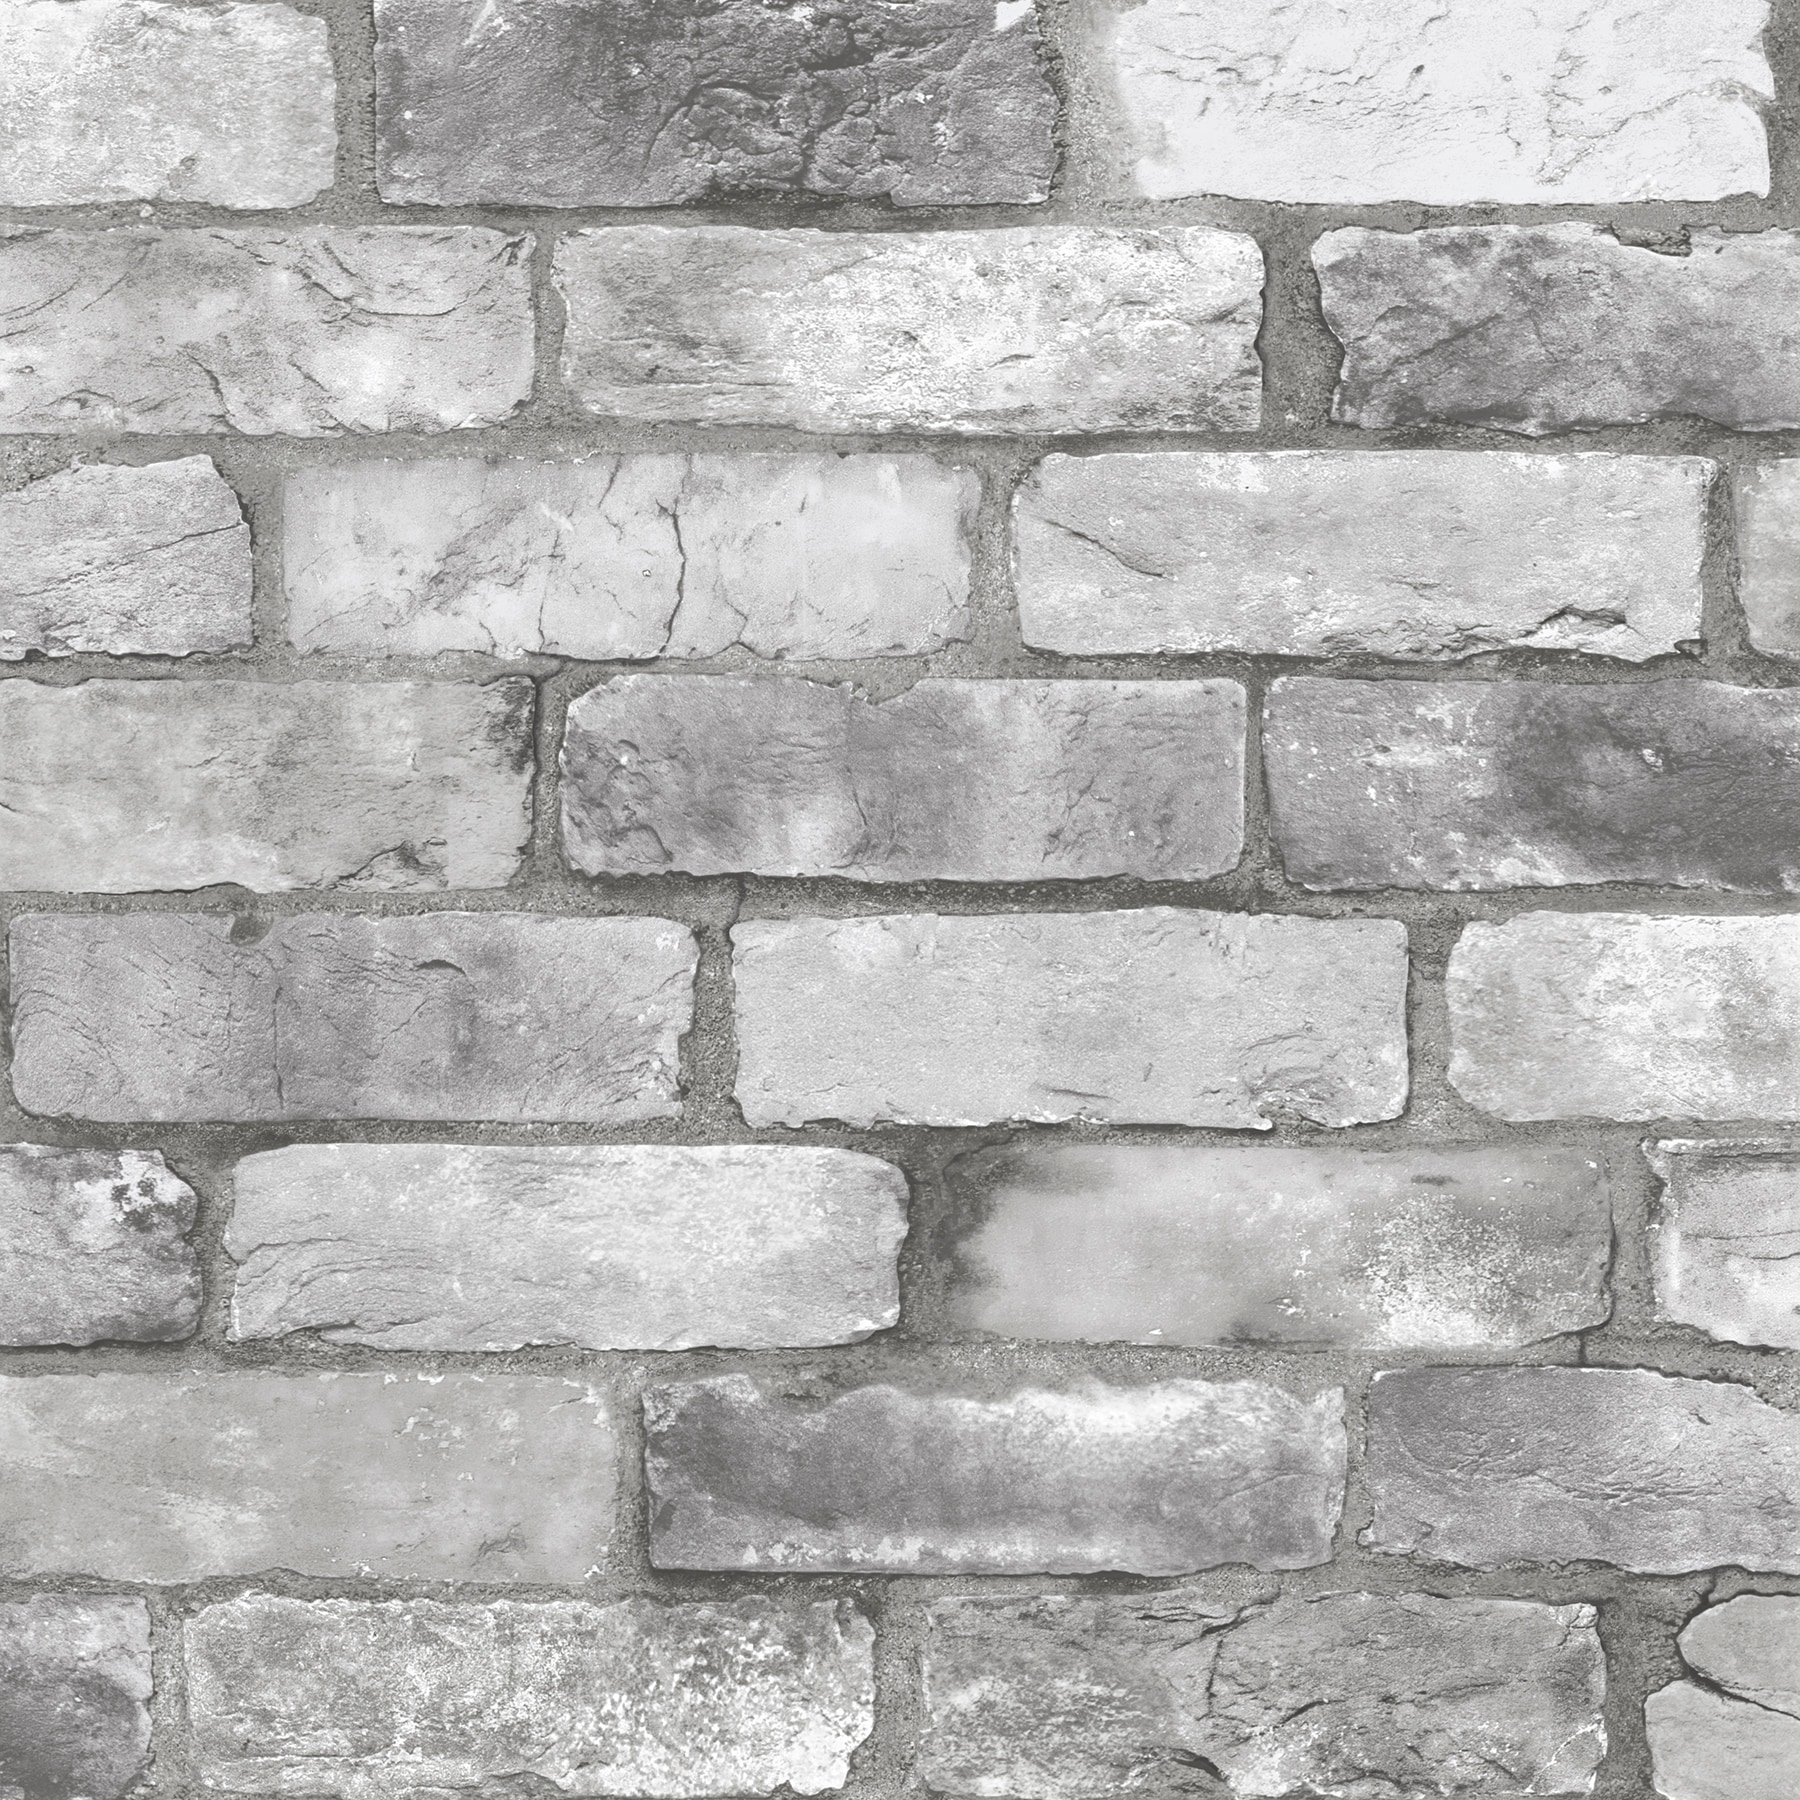 Gray Brick Pictures  Download Free Images on Unsplash